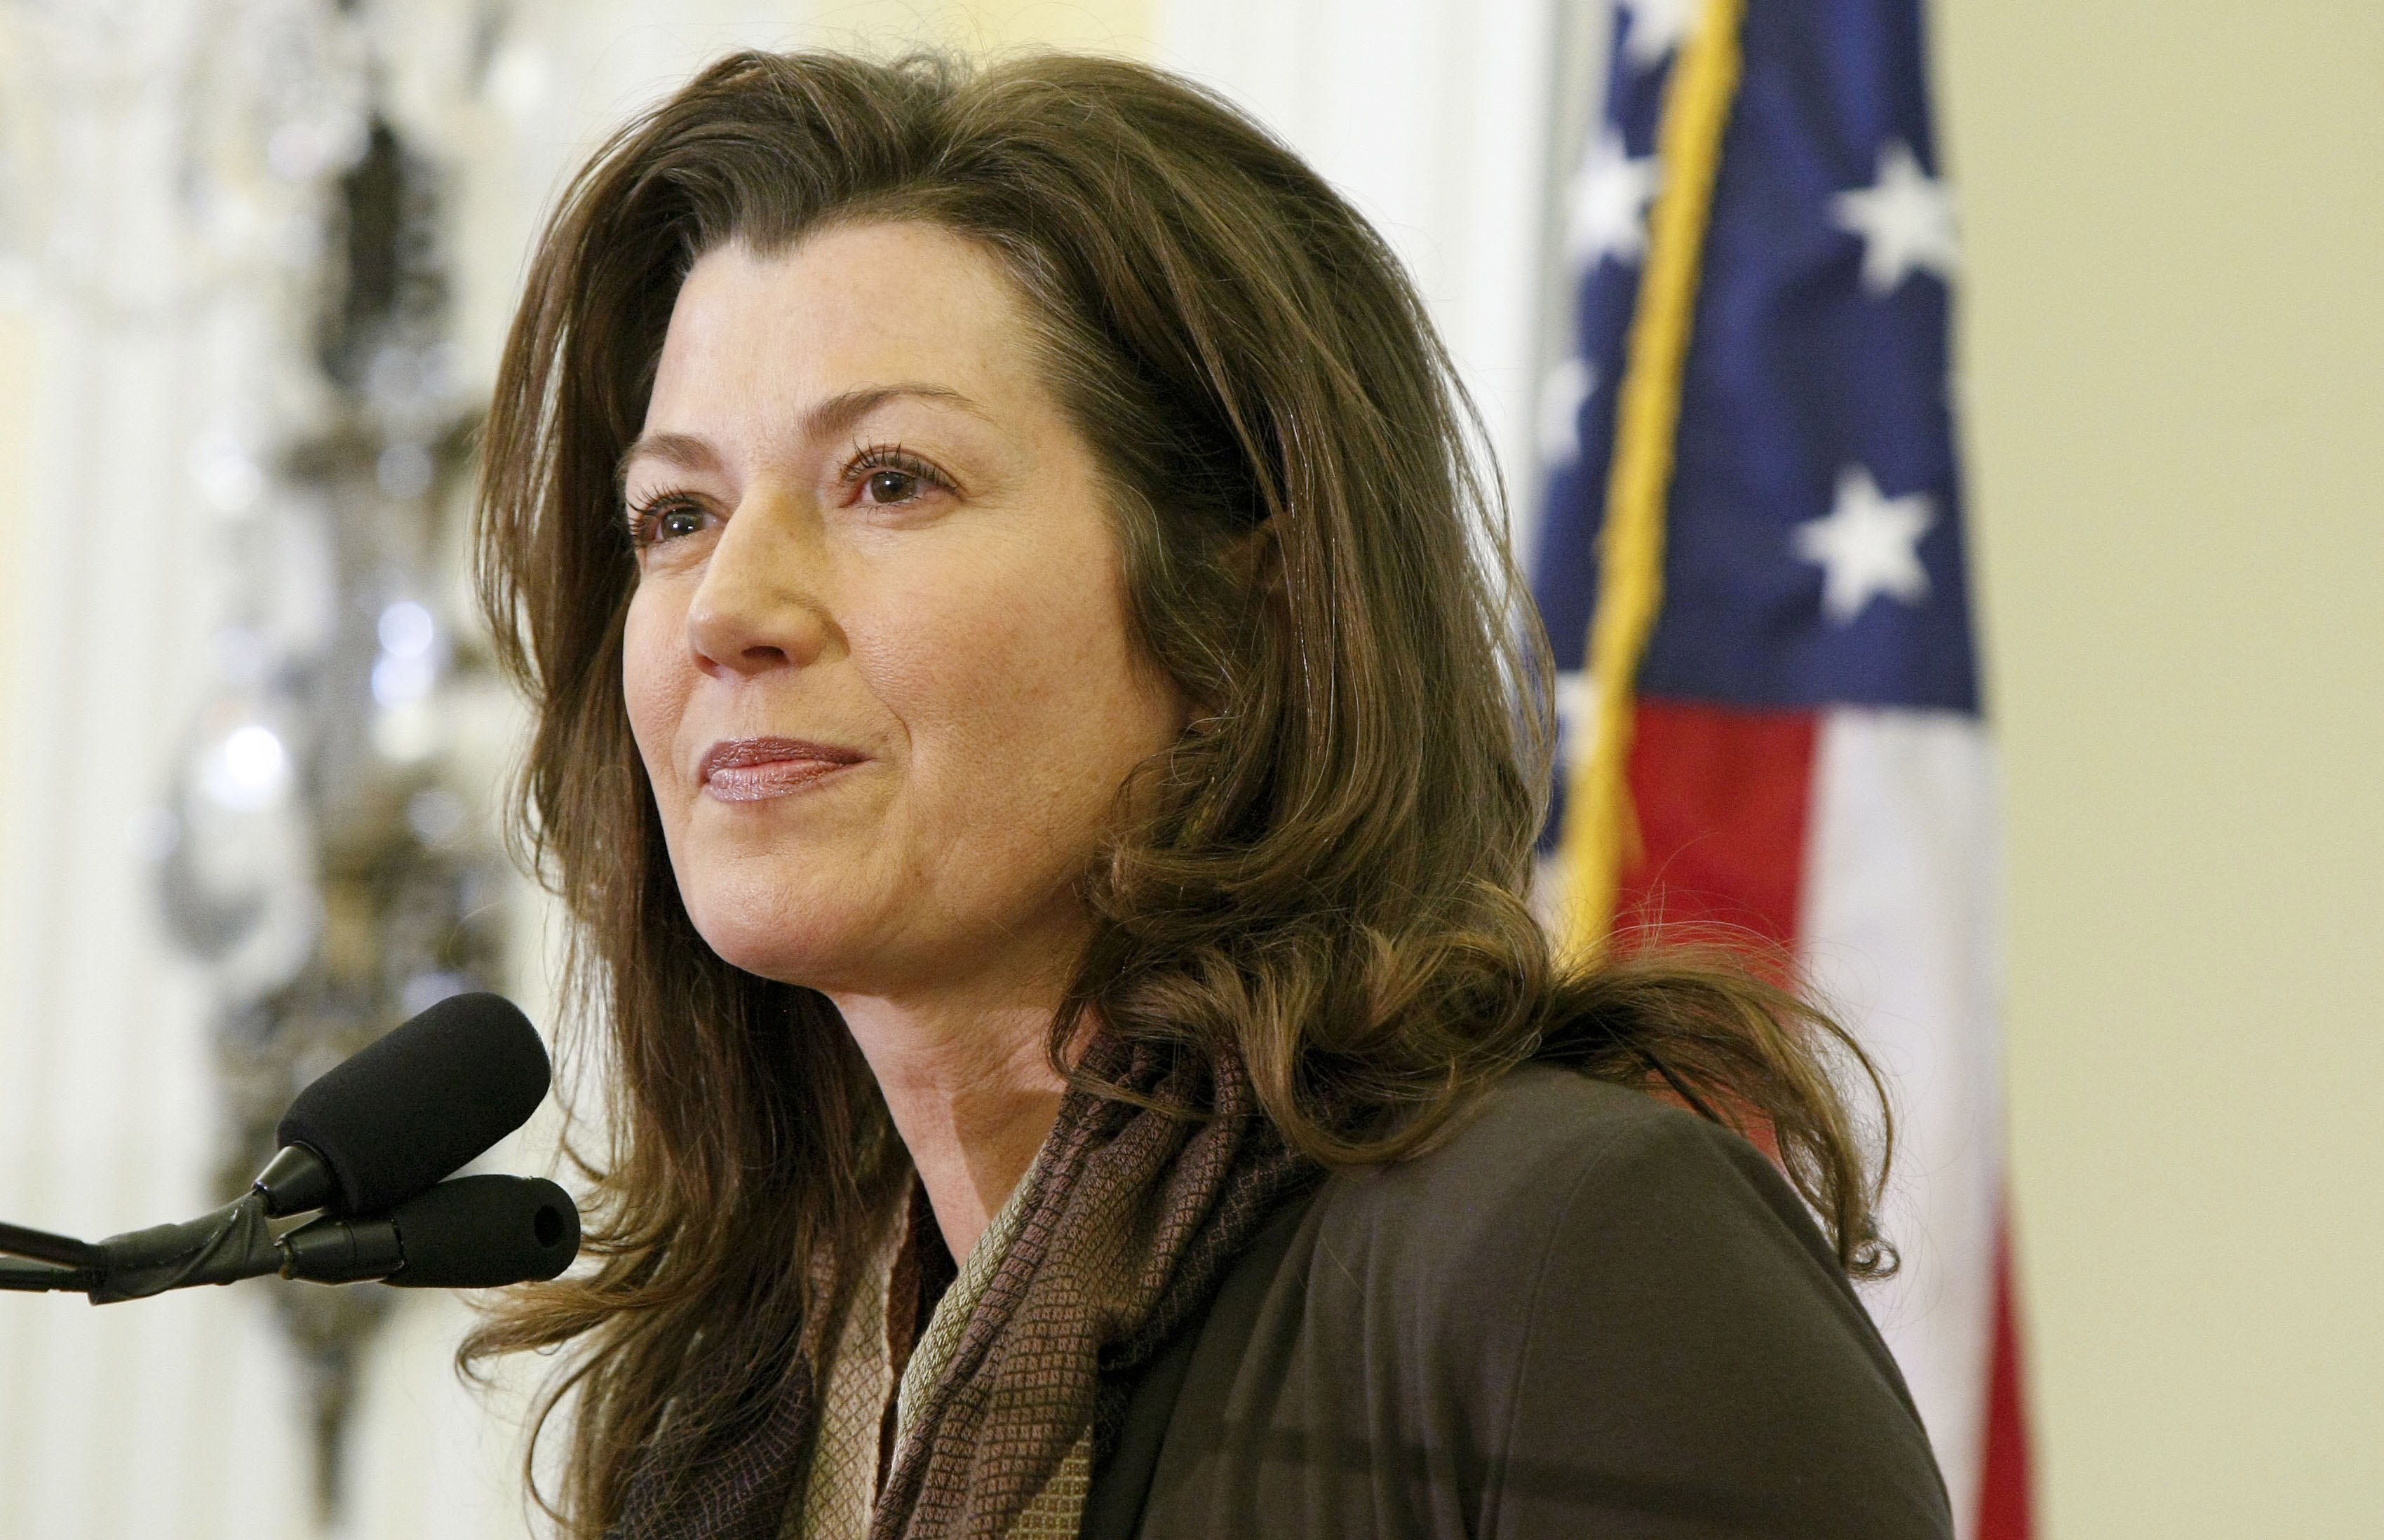 Amy Grant attends the 2010 Holiday Mail for Heroes program launch on November 11, 2010, in Washington, DC. | Source: Getty Images.